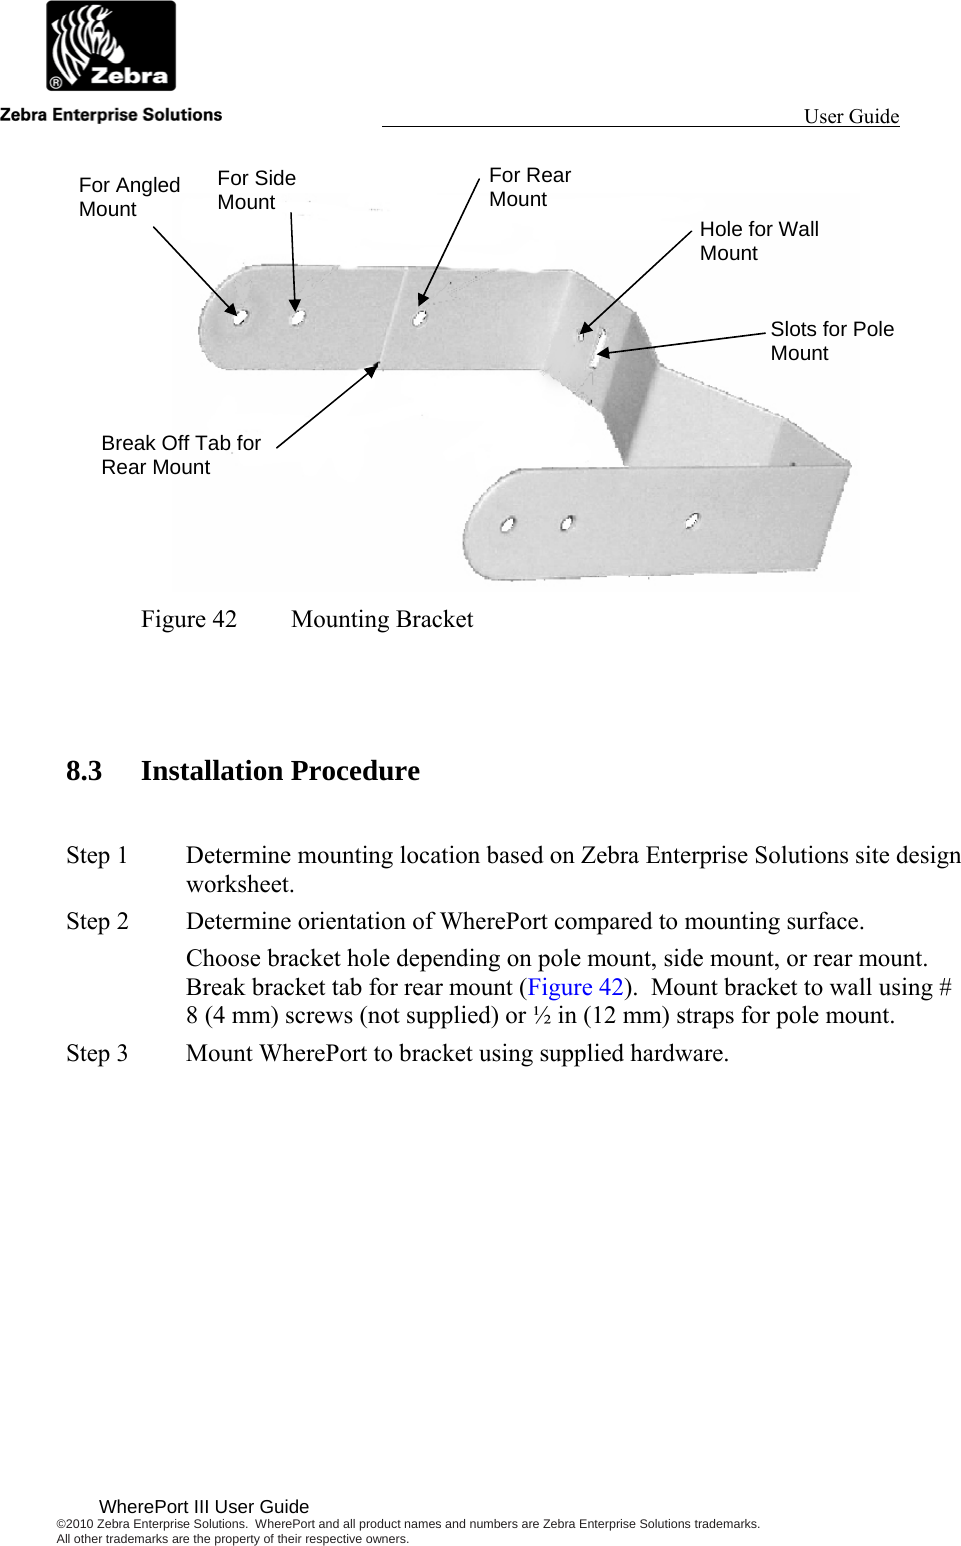                                                                                                                 User Guide                                        WherePort III User Guide ©2010 Zebra Enterprise Solutions.  WherePort and all product names and numbers are Zebra Enterprise Solutions trademarks.  All other trademarks are the property of their respective owners.    Figure 42  Mounting Bracket   8.3 Installation Procedure  Step 1  Determine mounting location based on Zebra Enterprise Solutions site design worksheet. Step 2  Determine orientation of WherePort compared to mounting surface. Choose bracket hole depending on pole mount, side mount, or rear mount.  Break bracket tab for rear mount (Figure 42).  Mount bracket to wall using # 8 (4 mm) screws (not supplied) or ½ in (12 mm) straps for pole mount. Step 3  Mount WherePort to bracket using supplied hardware. For Angled Mount For Side Mount For Rear Mount Break Off Tab for Rear Mount Hole for Wall Mount Slots for Pole Mount 